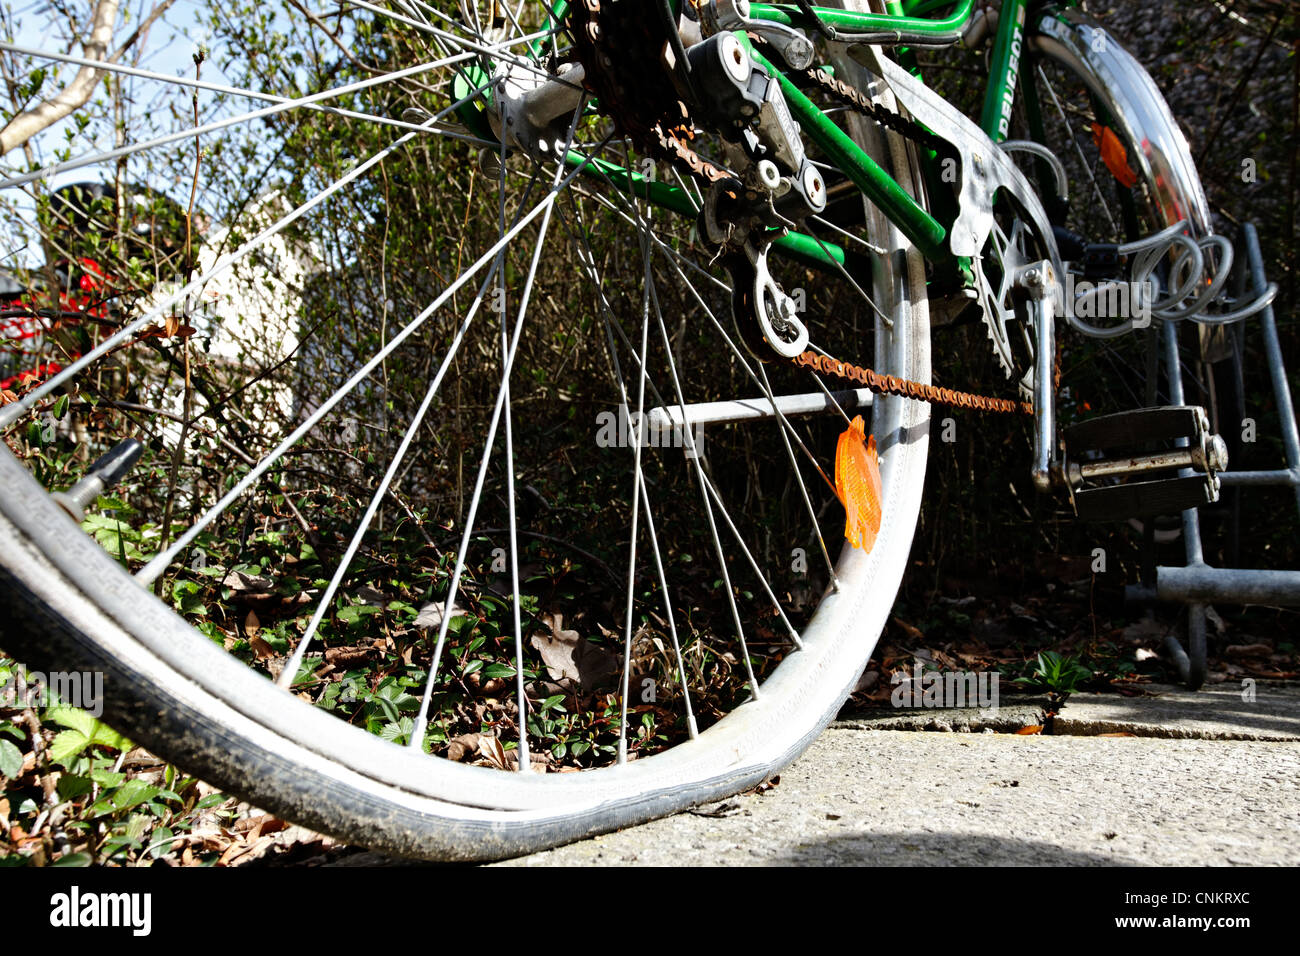 Neglected bicycle with a flat tyre, Stock Photo